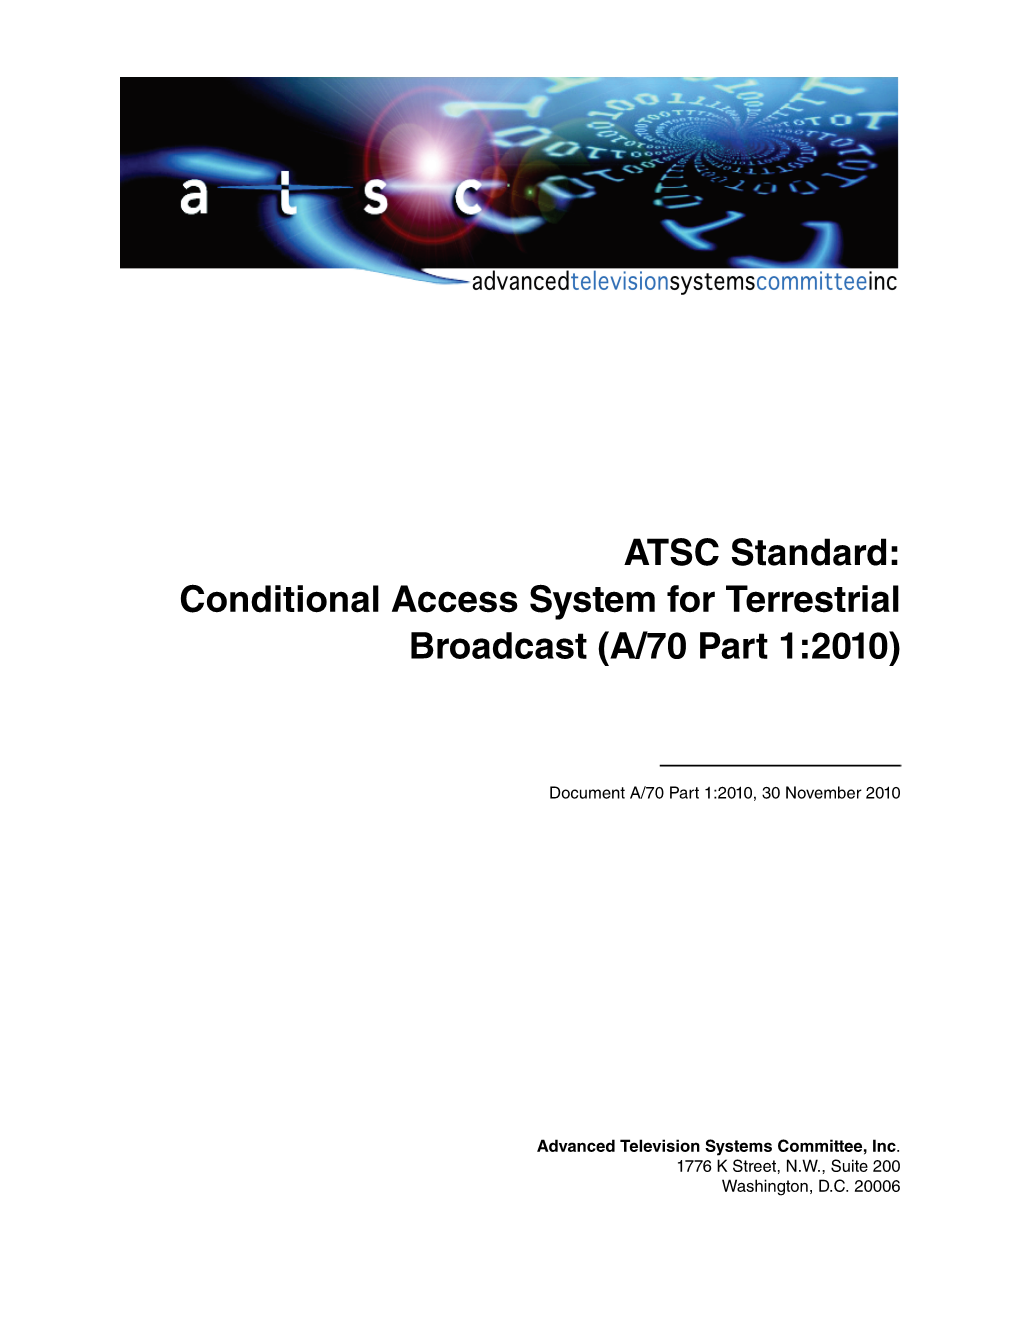 ATSC Standard: Conditional Access System for Terrestrial Broadcast (A/70 Part 1:2010)